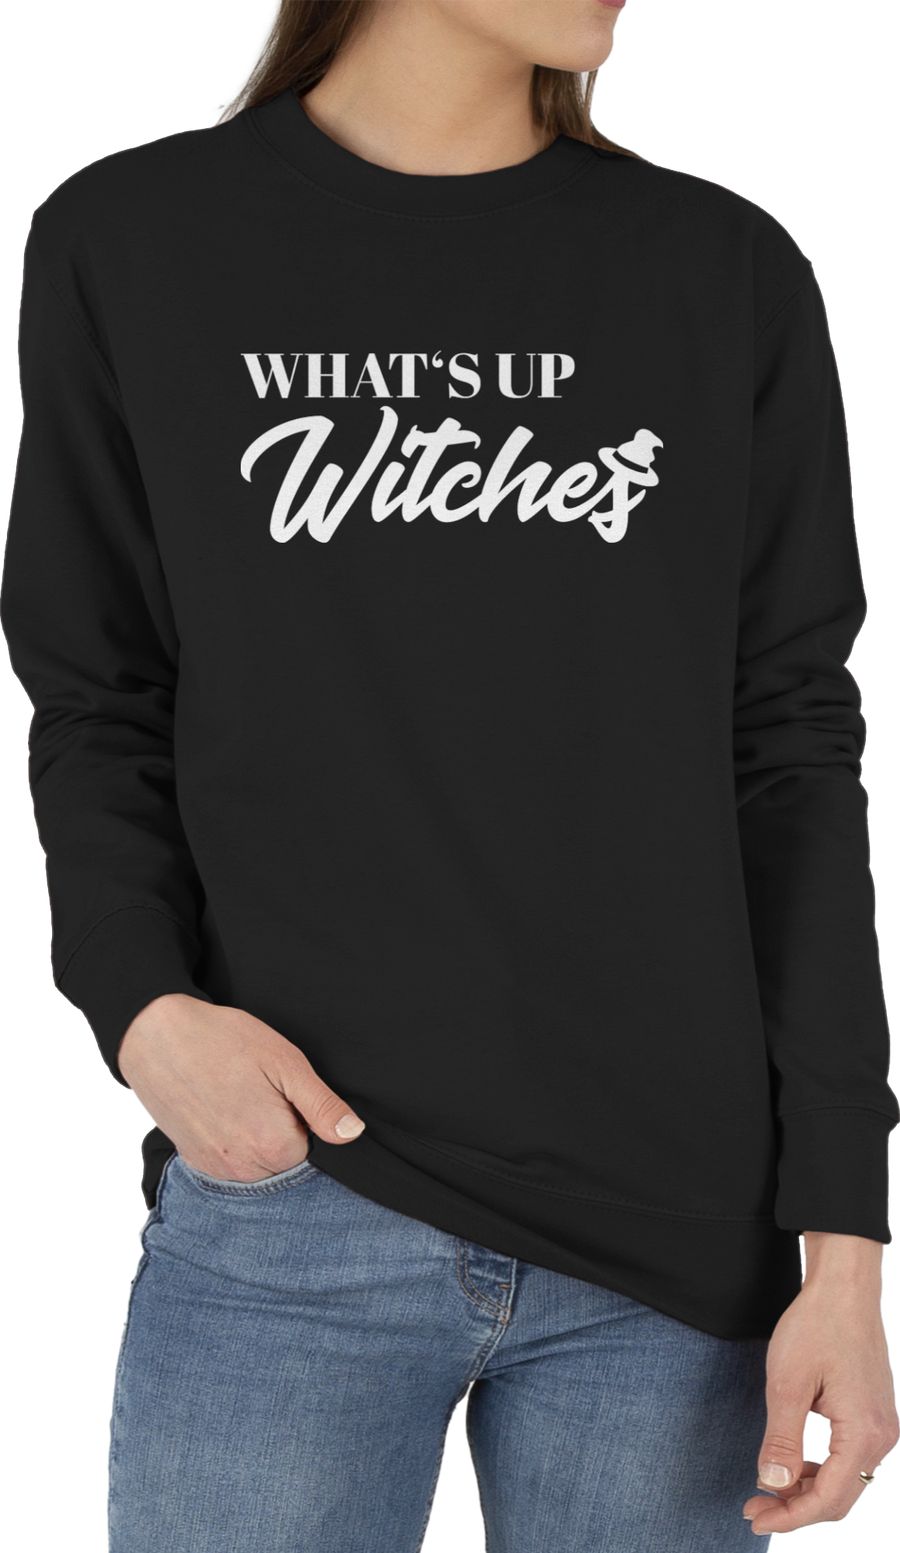 Whats up witches